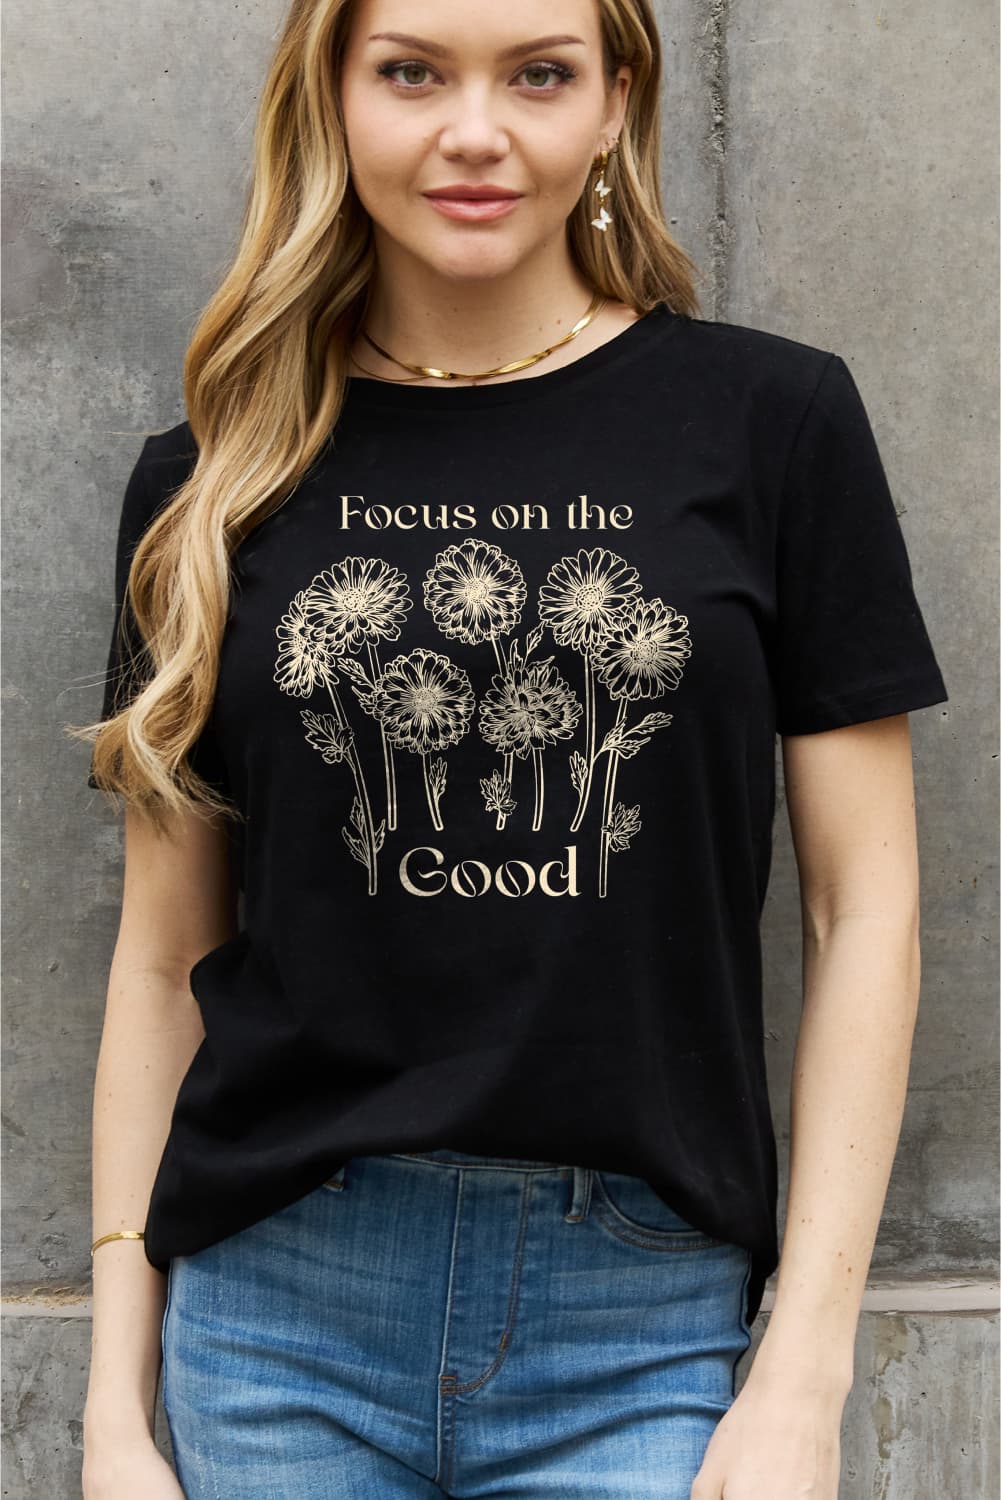 Dark Slate Gray Simply Love Full Size FOCUS ON THE GOOD Graphic Cotton Tee Sentient Beauty Fashions Apparel & Accessories